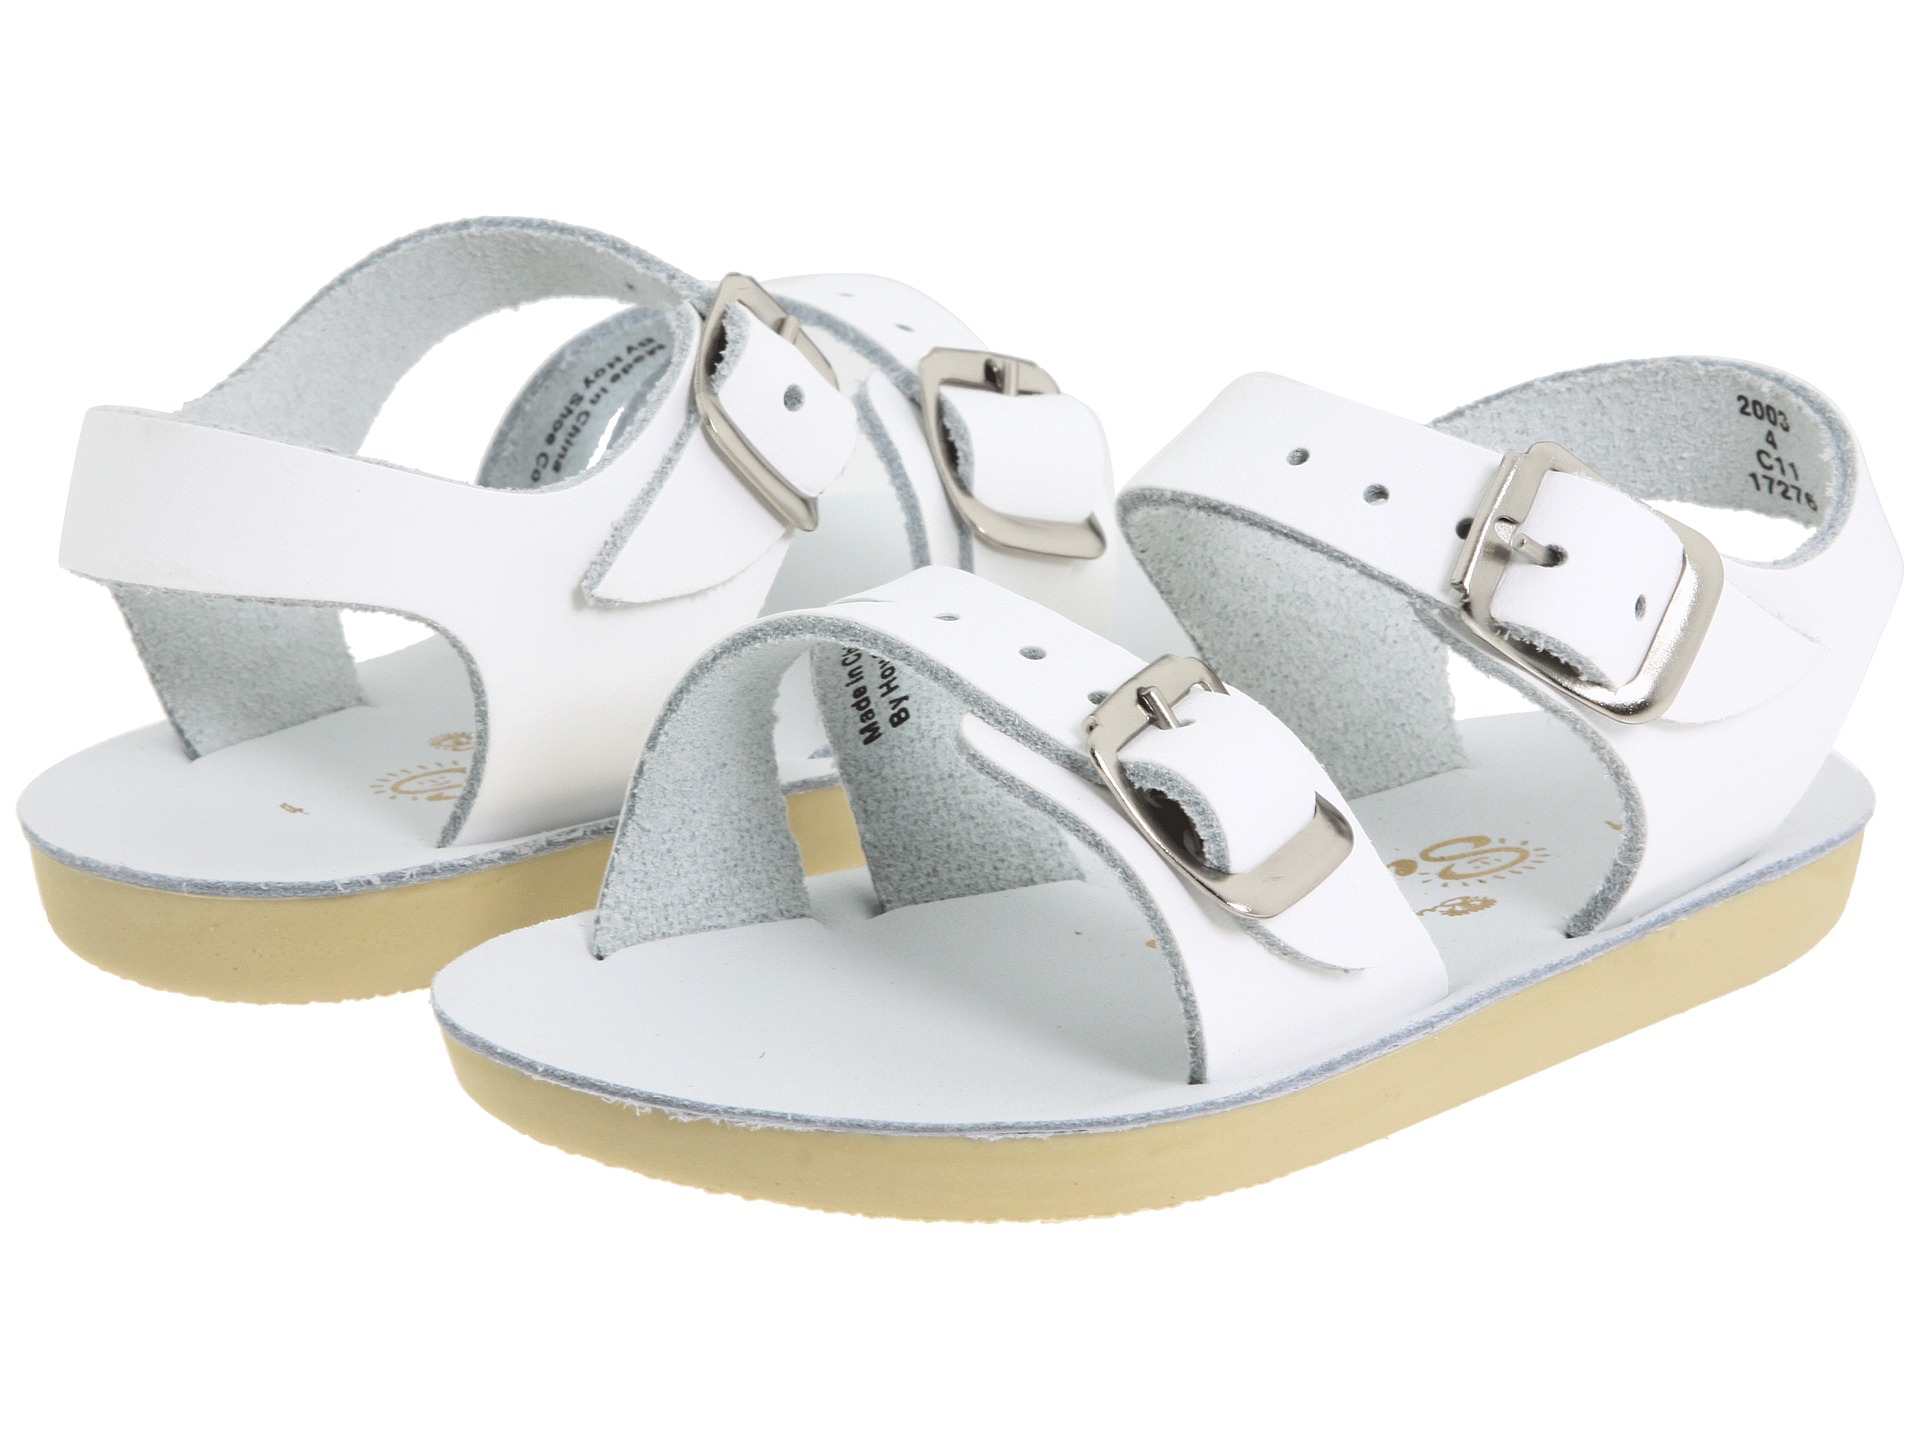 Water Sandal by Hoy Shoes Sun-San - Sea Wees (InfantToddler) - Zappos ...